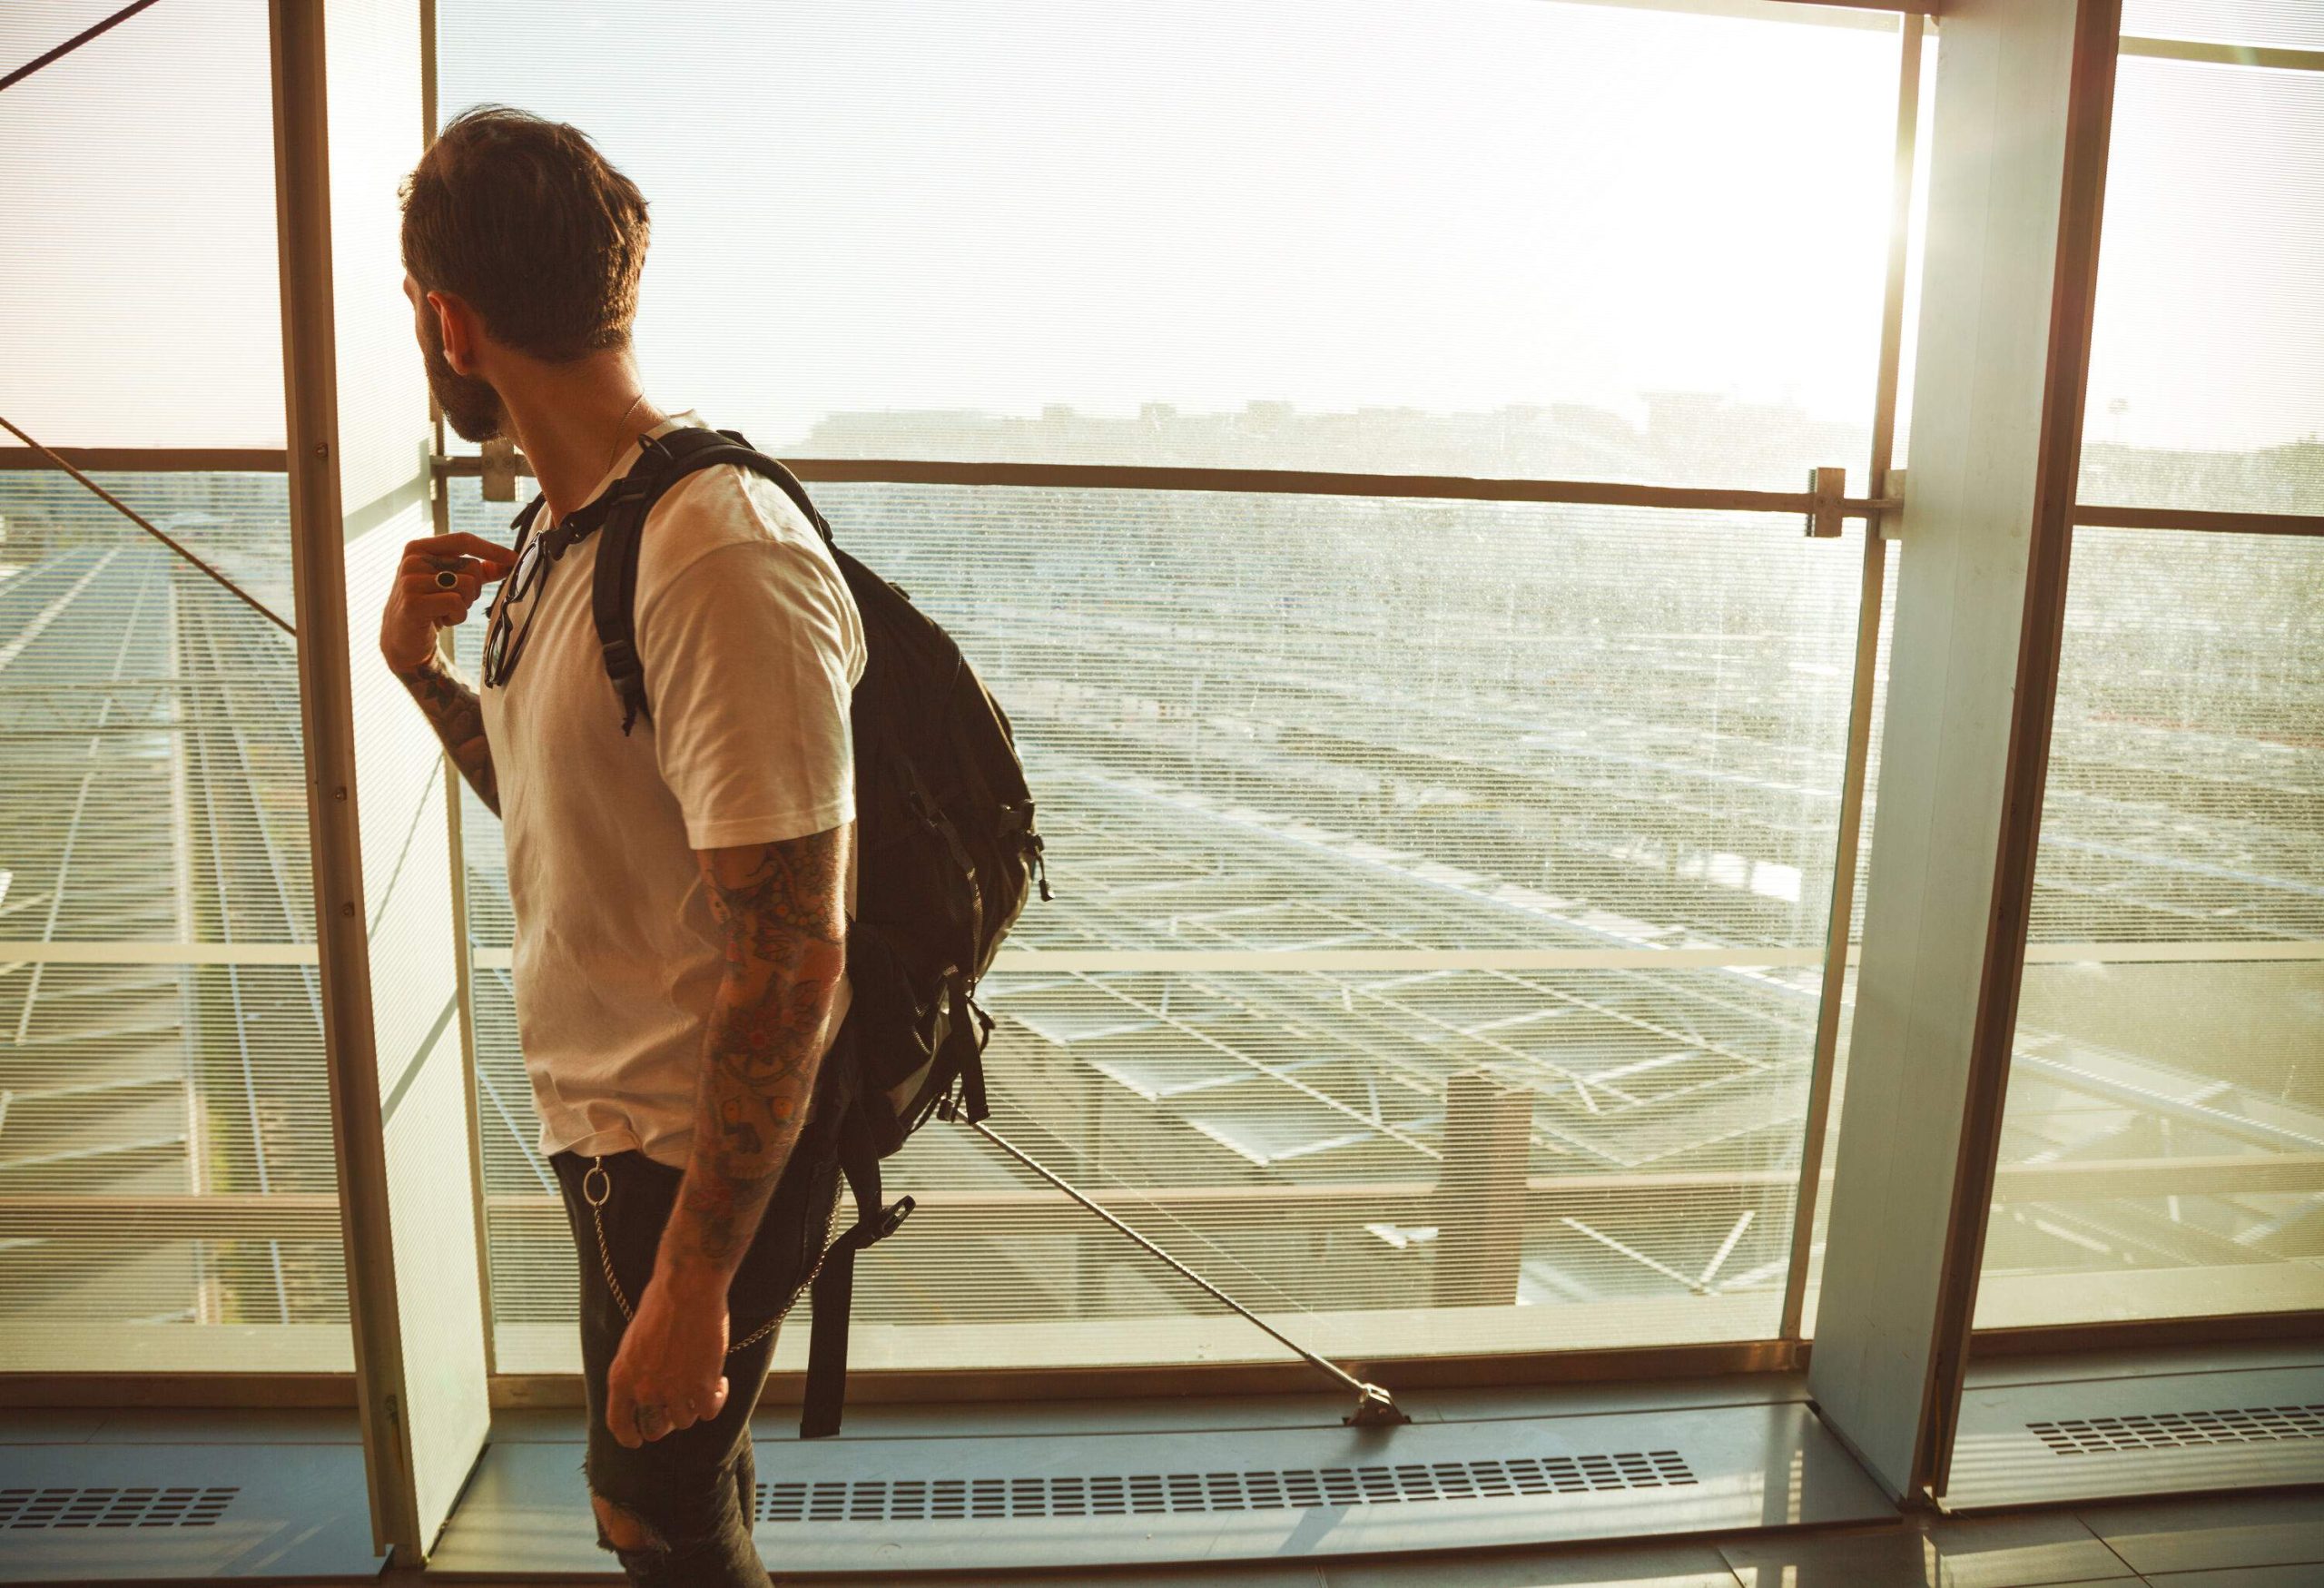 A tattooed man with a backpack looking out the large glass windows of an airport terminal.